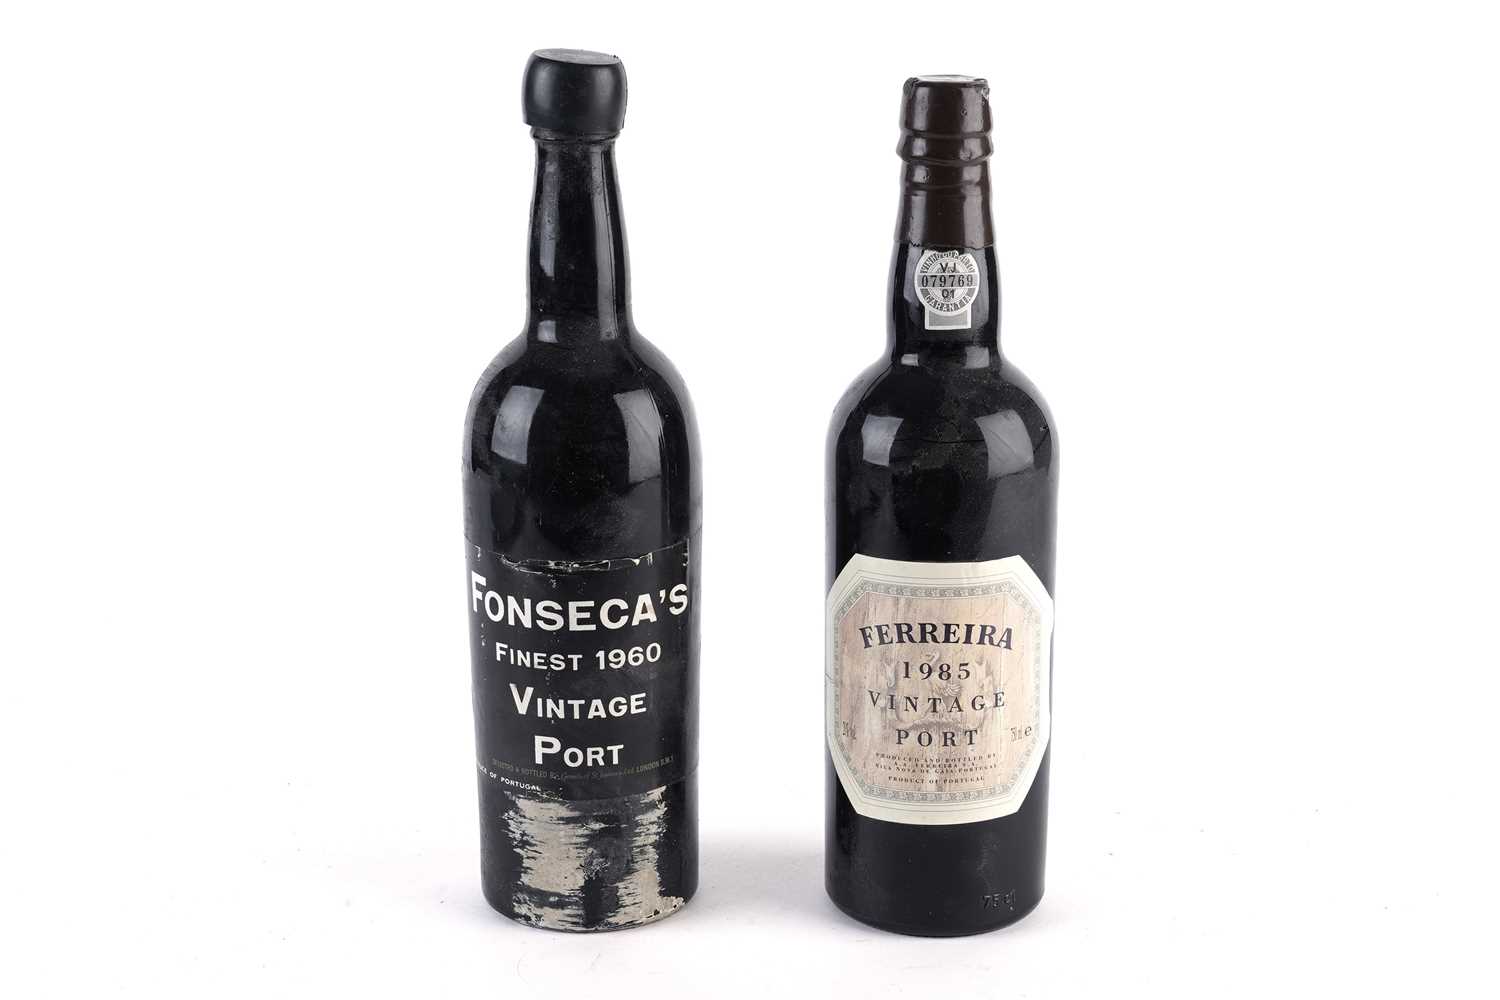 A bottle of Fonseca’s Finest Vintage Port; and another